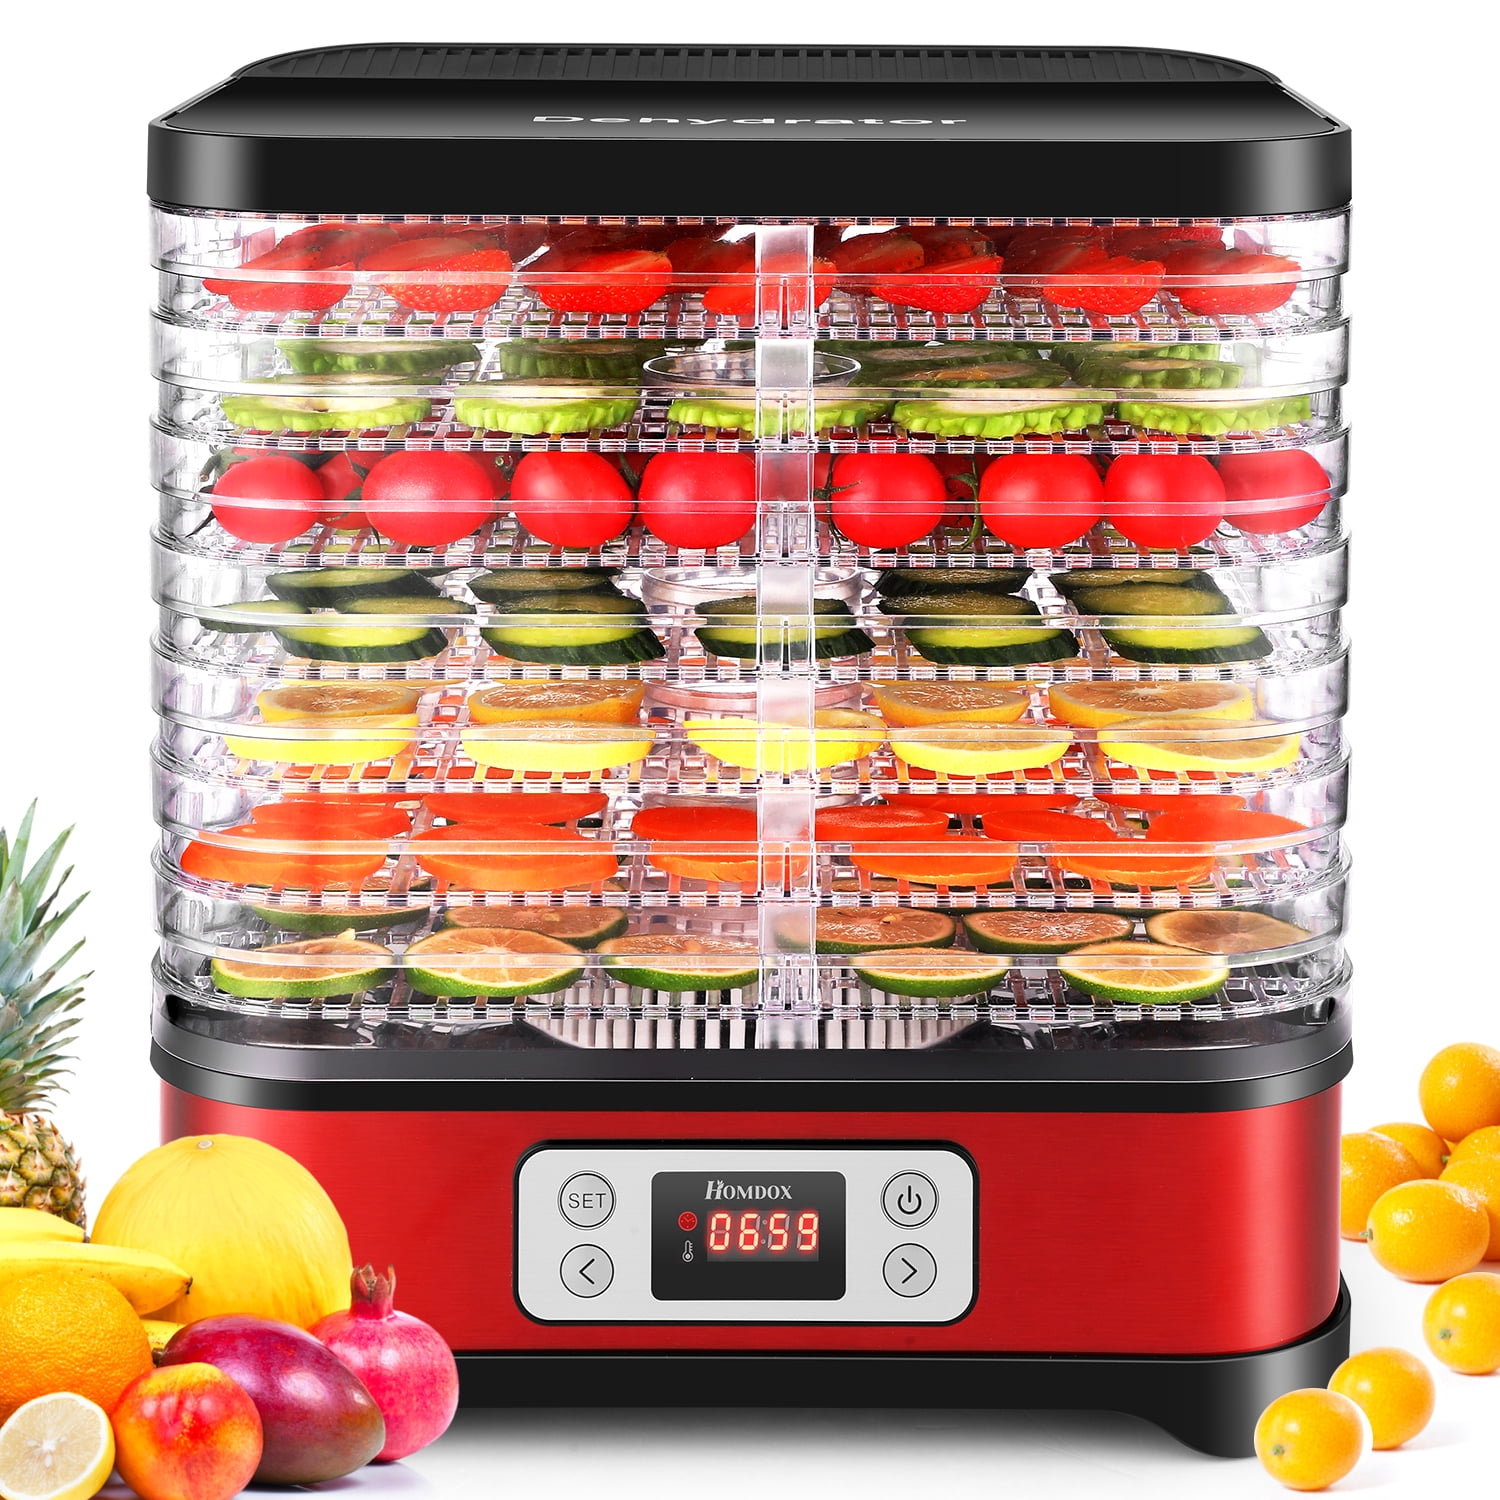 Homdox Food Dehydrator Machine, Dehydrators for Food and Jerky with Fruit  Roll Sheet + 8 Trays + 400W Digital Timer and Temperature Control